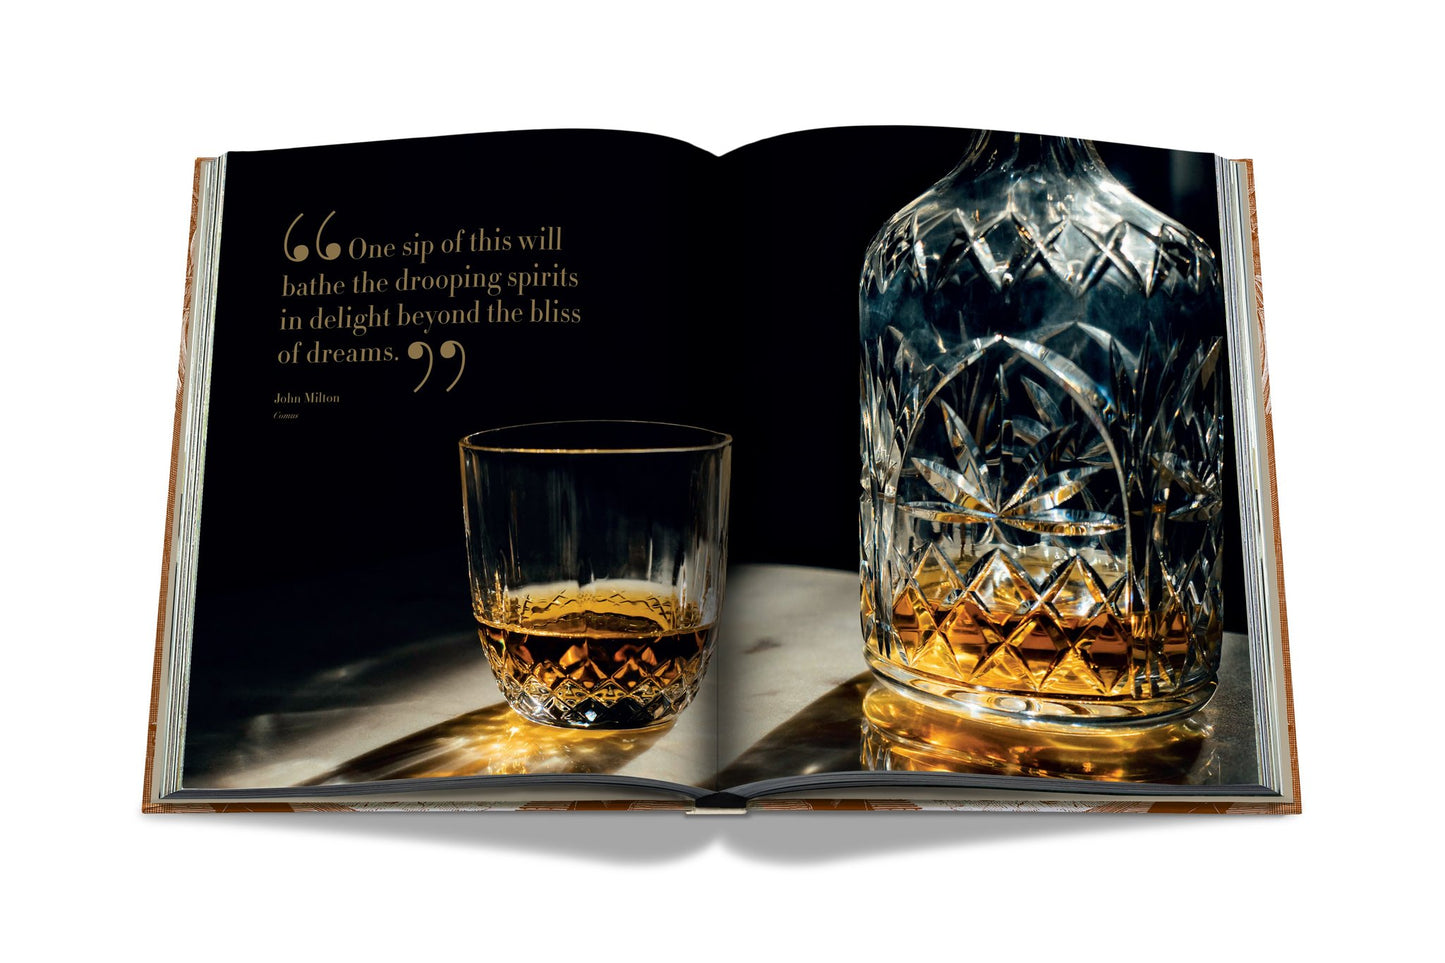 Book Whiskey: Impossible collection